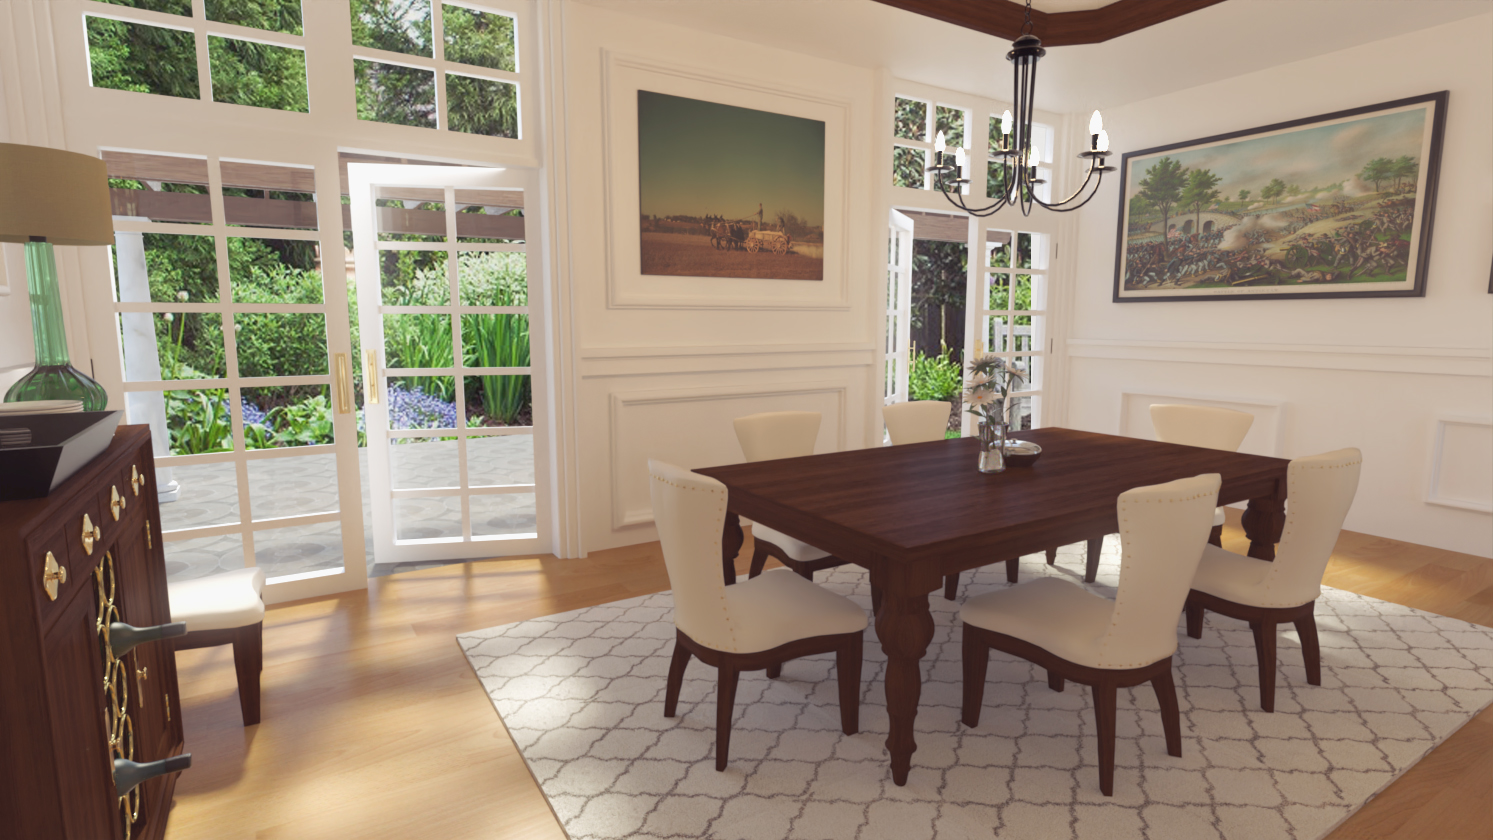 Louisiana Dining Room by: kubramatic, 3D Models by Daz 3D